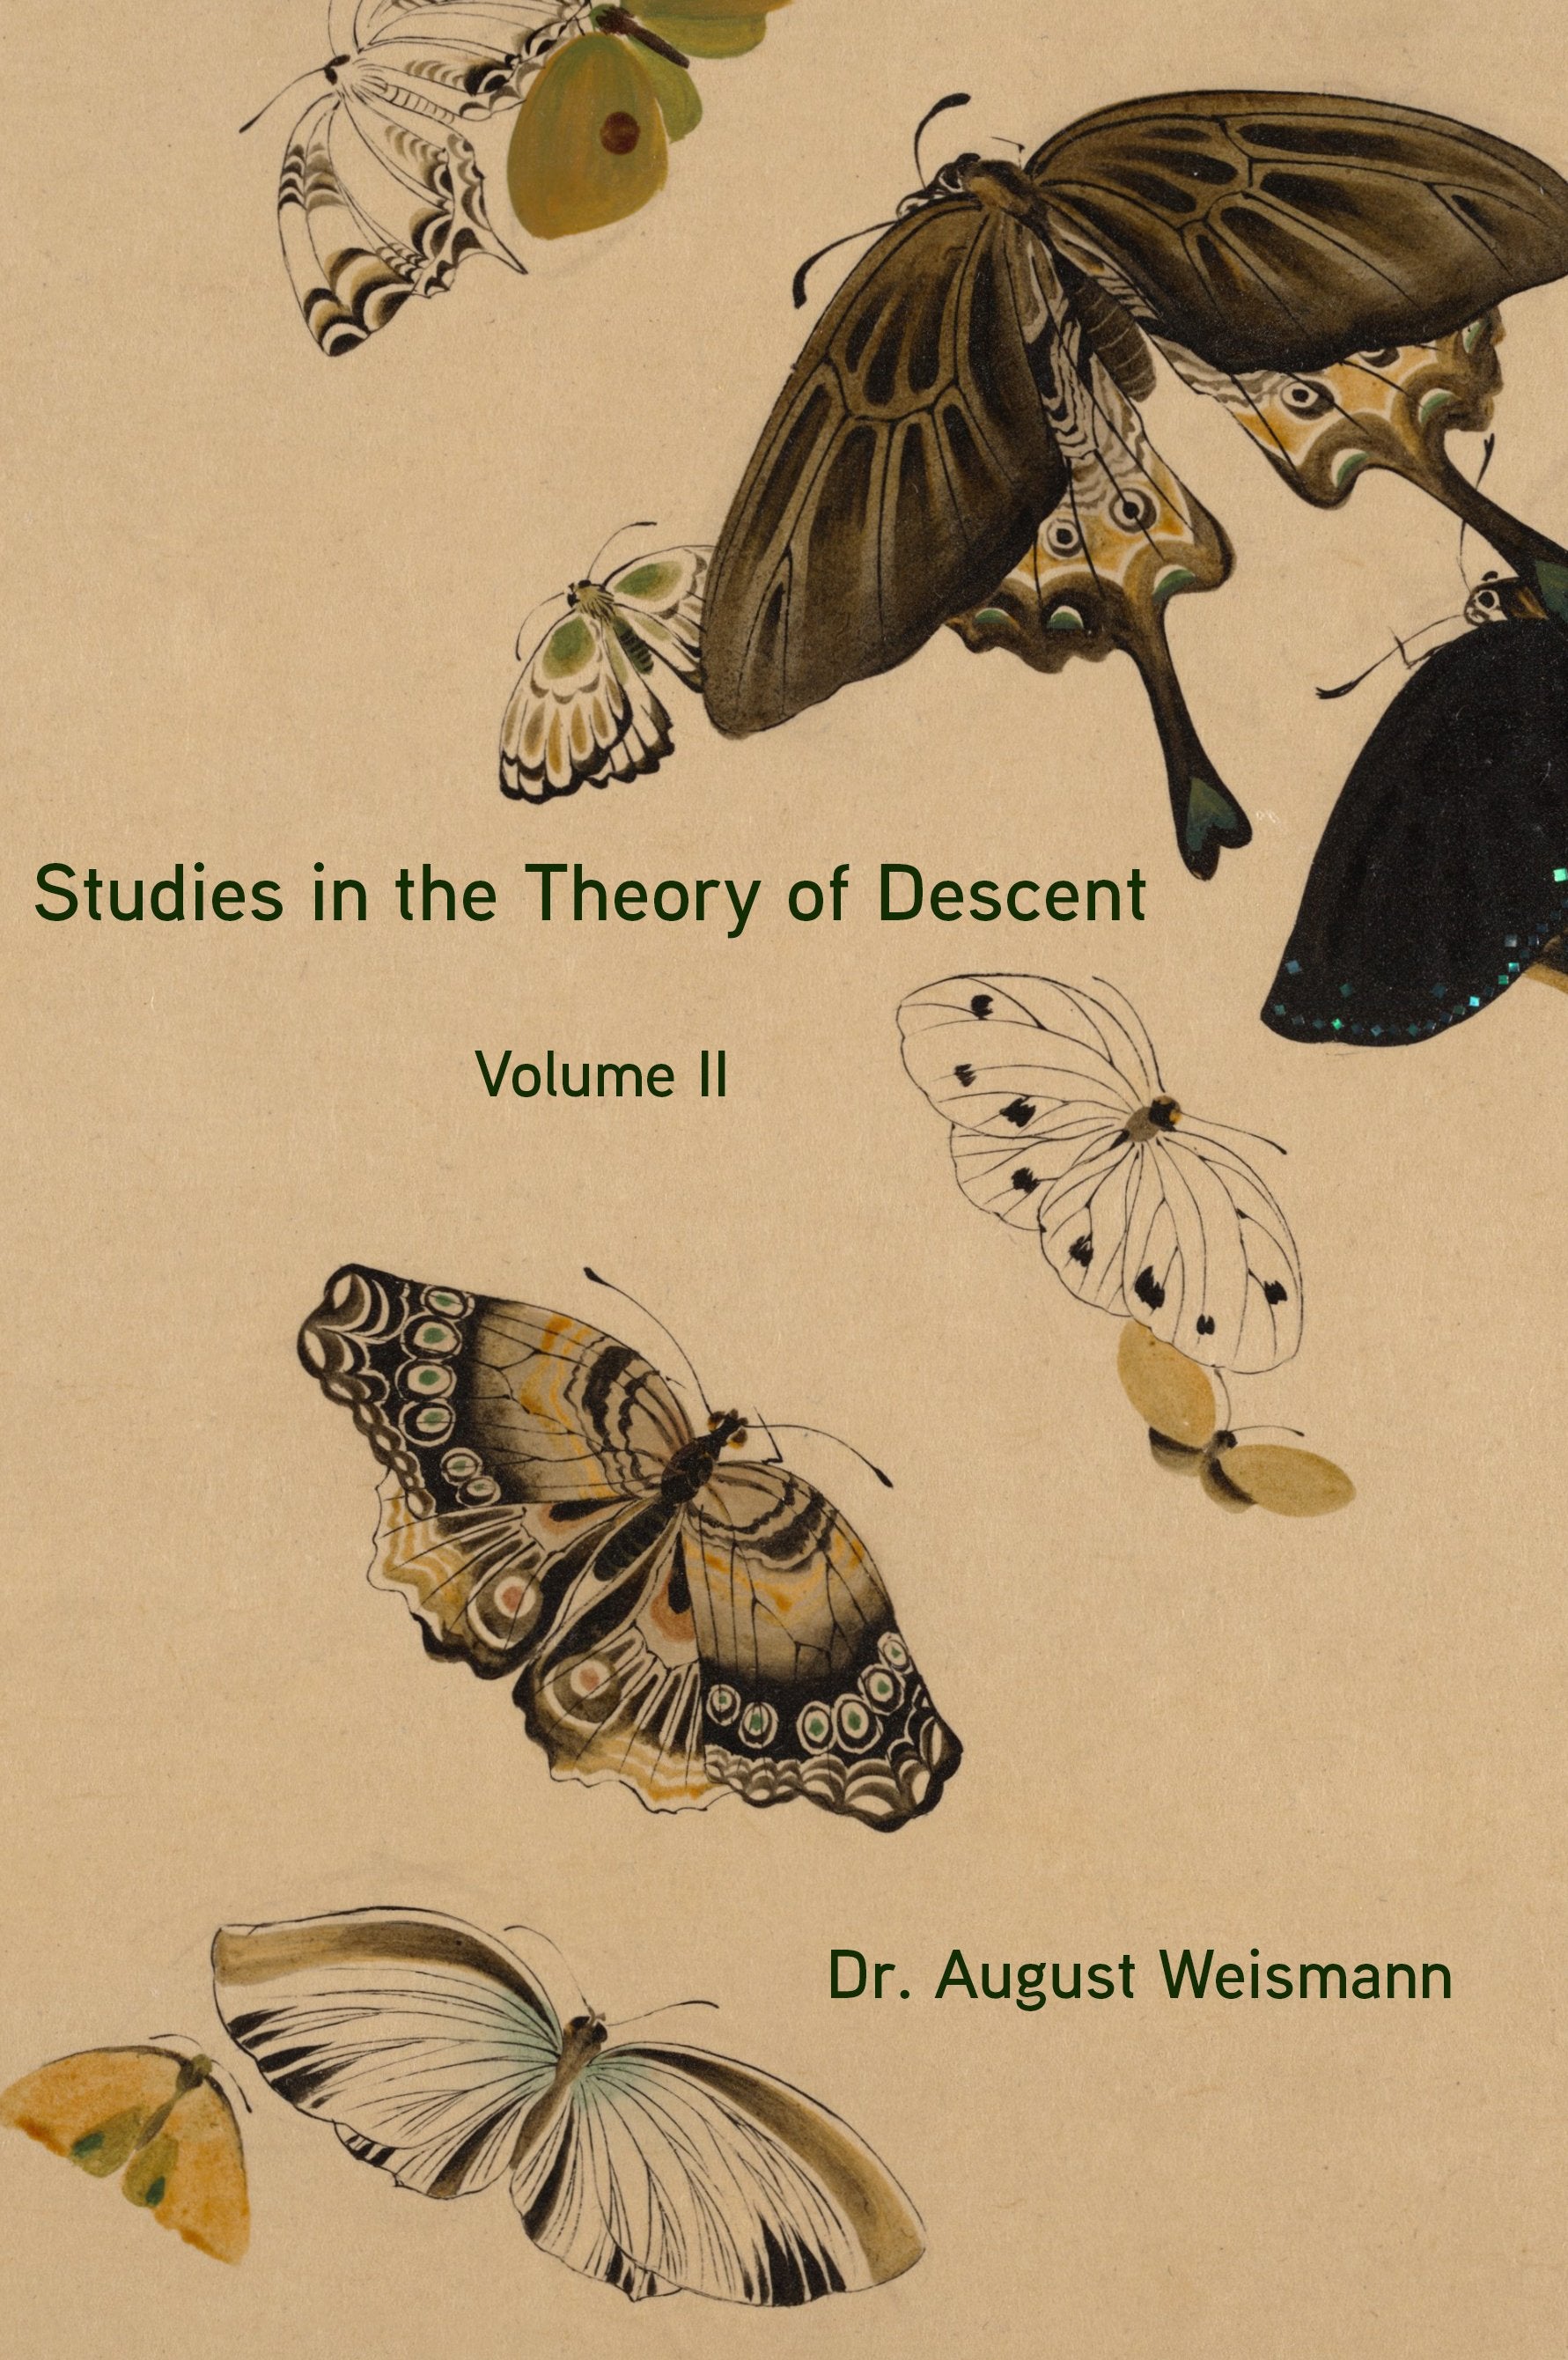 Studies in the Theory of Descent Volume II